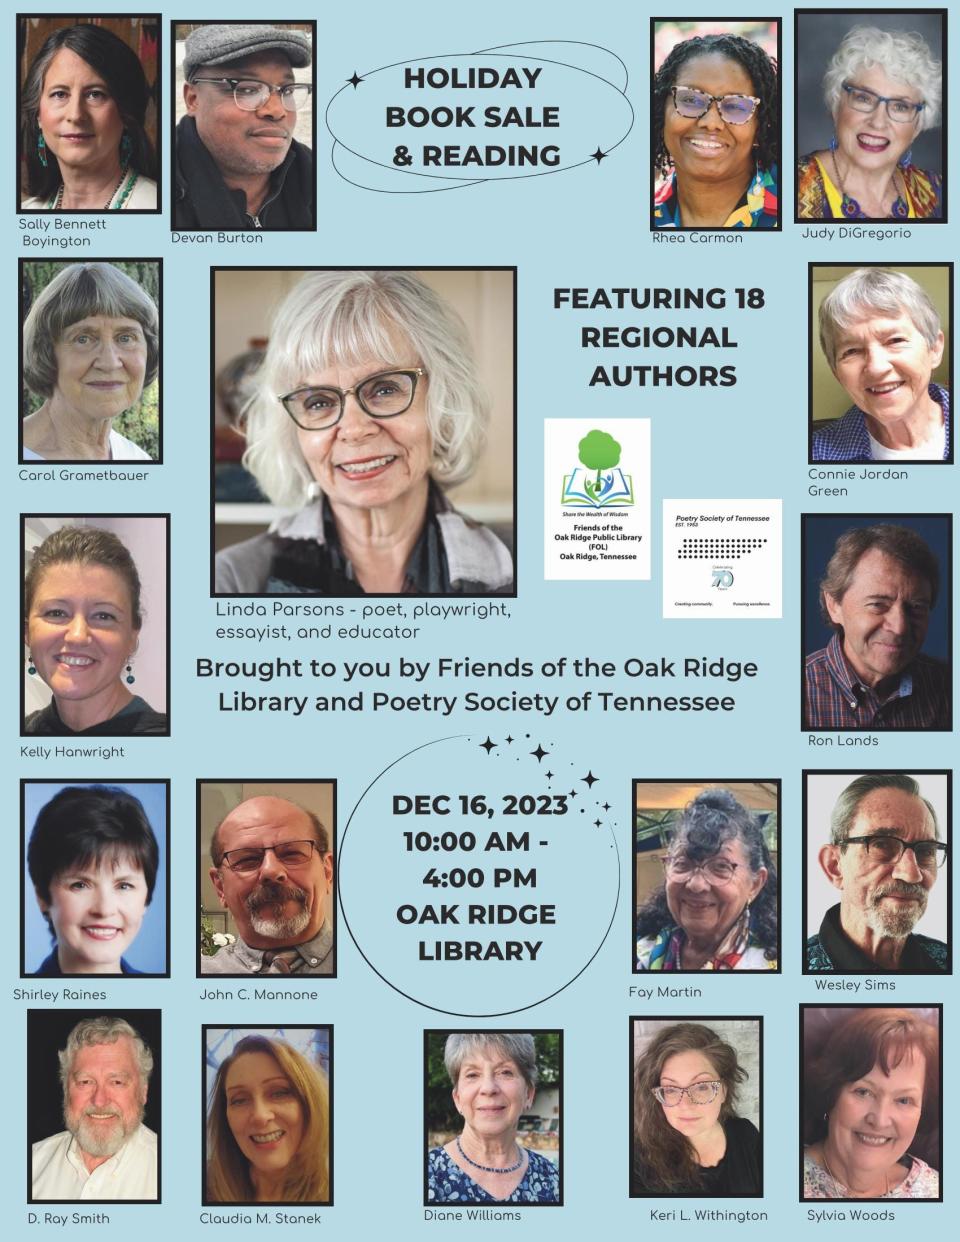 Eighteen local writers and poets will read briefly from their works Dec. 16 and sell their books for the holidays at the Oak Ridge Public Library Dec. 16.